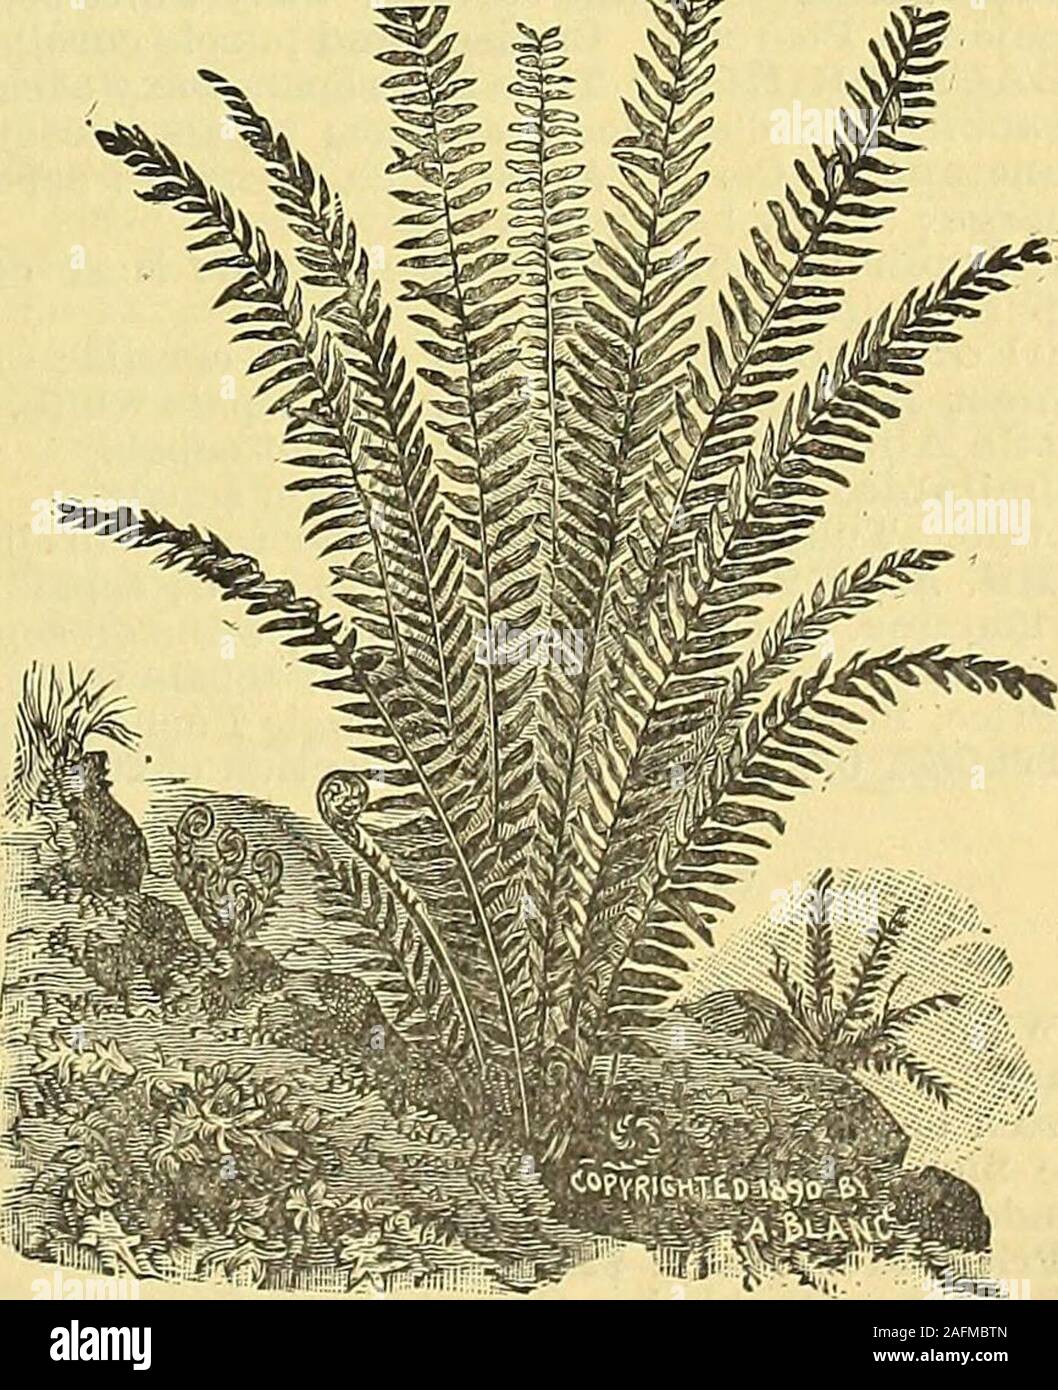 . Manual of everything for the garden : 1894. ace,fineness of texture and richness of color.Price, strong plants, 50 cts. each, $4.50 perdozen. A. Tenuissimus. Very fine, filmy foliage.A handsome climbing plant for the window,and a very useful pot plant. Price, 15 cts.each, $1.50 per dozen. D AV ALU A BULLATA. (HARES-FOOT FERN.) We offer this grand variety prepared inglobe shape ready for hanging up. In a shorttime they develop leaves and make grandornaments through the season, suspended onthe piazza or in a window. Price, $1.00 each. SWORD FERN. (NEPHROLEPSIS E3TALTATA.) In well-grown specime Stock Photo